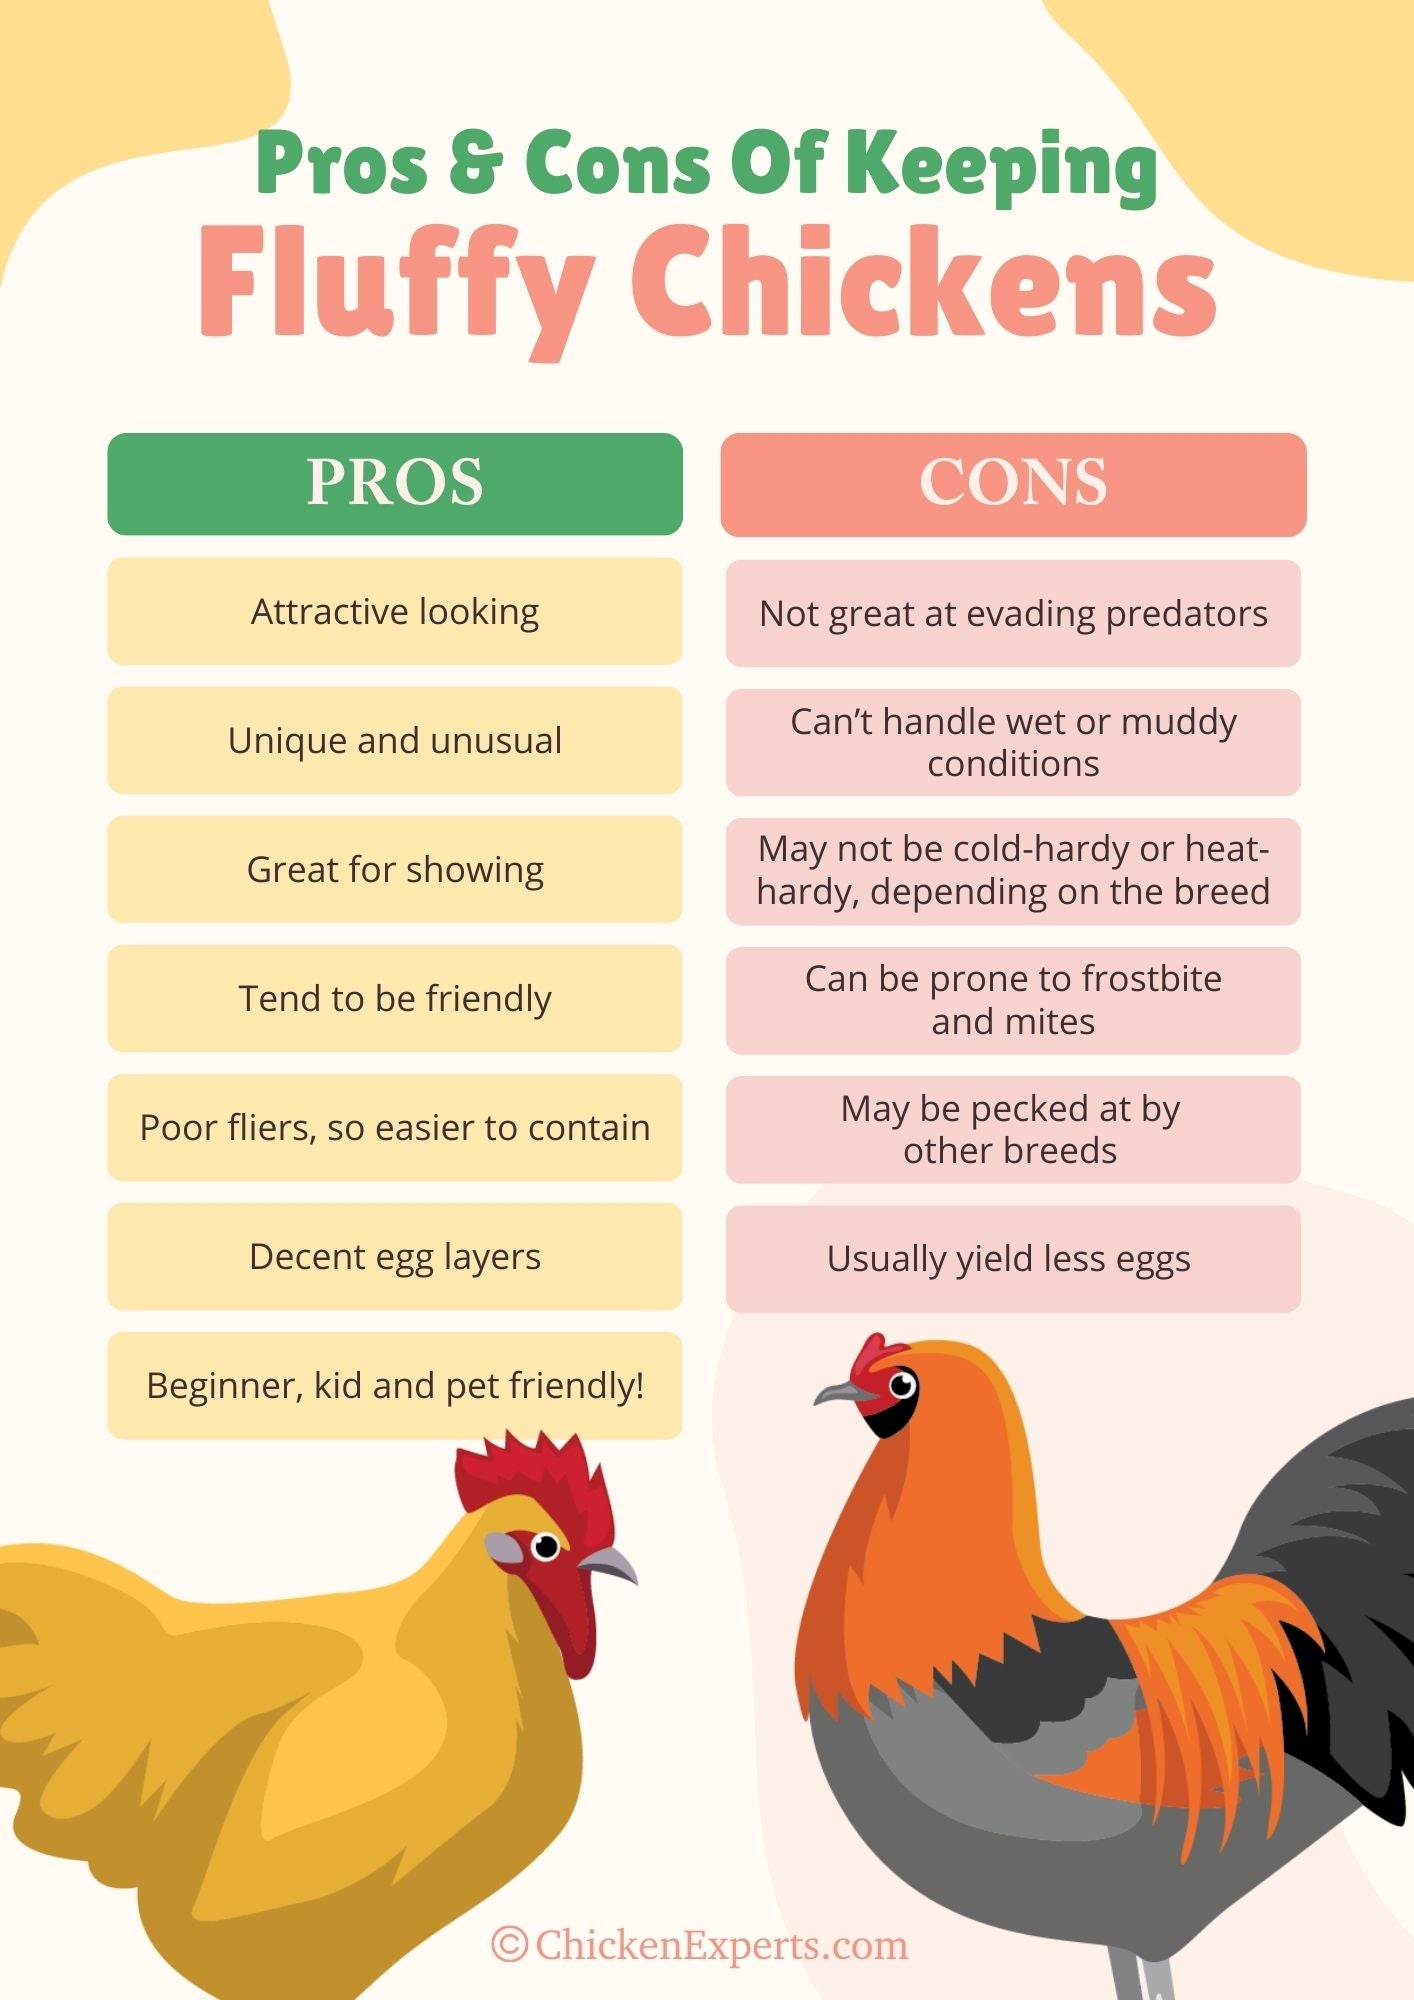 pros and cons of keeping fluffy chickens